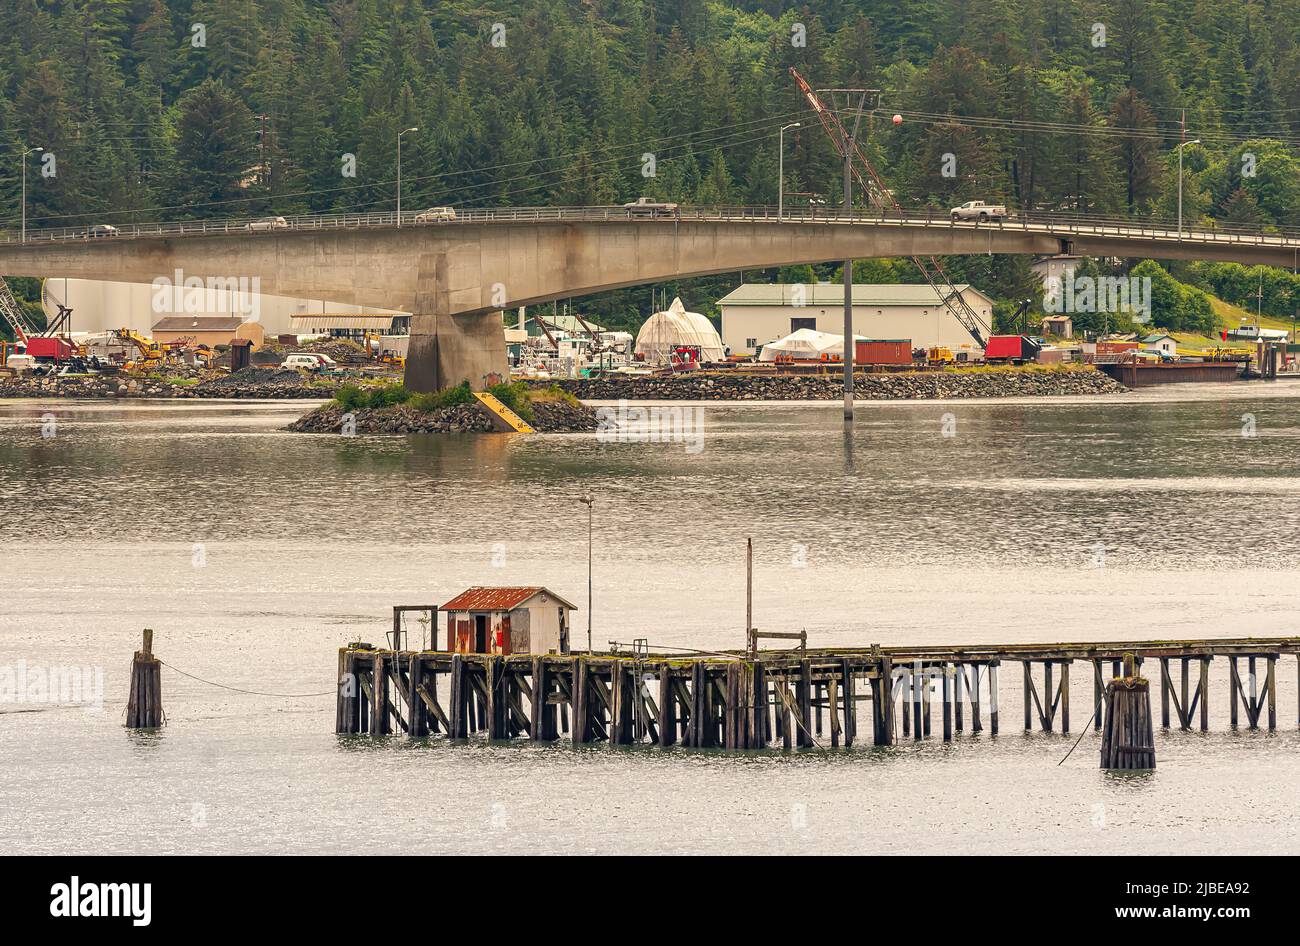 Juneau, Alaska, USA - July 19, 2011: Concrete bridge over Gastineau Channel with cars on top and construction site behind. Gray ocean water up front a Stock Photo